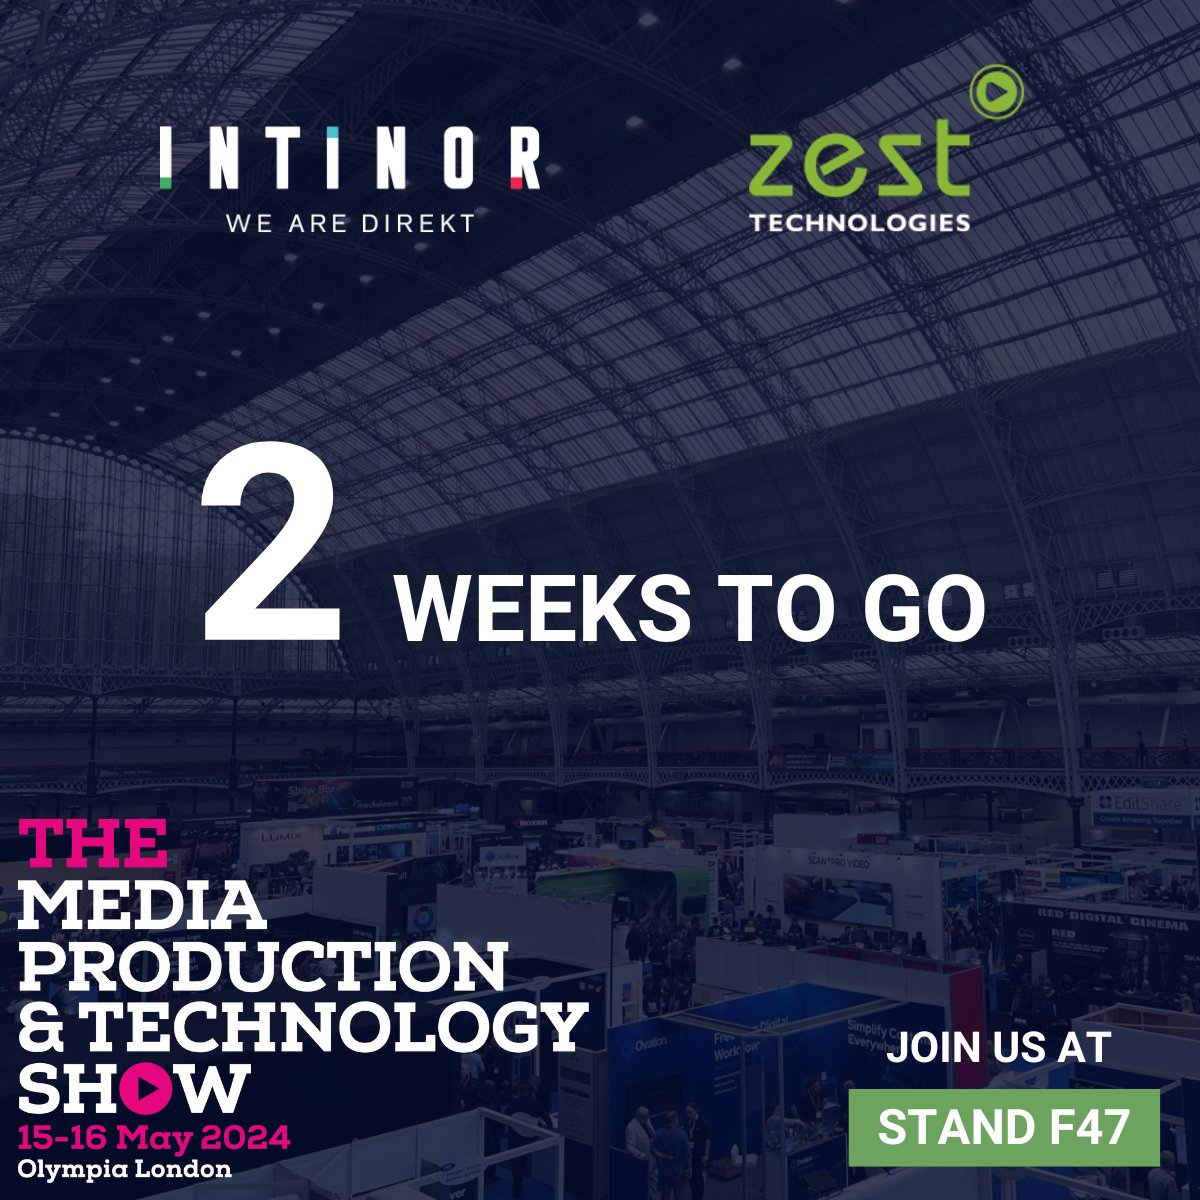 Just two weeks to go until #MPTS2024! The countdown is on, and we're getting everything ready to showcase our latest streaming technology and Direkt series at stand F47 with @ZestTechUK. @mediaprodshow #WeAreDirekt #MadeInSweden #Bifrost #Direktlink #SRT #HEVC #IDM